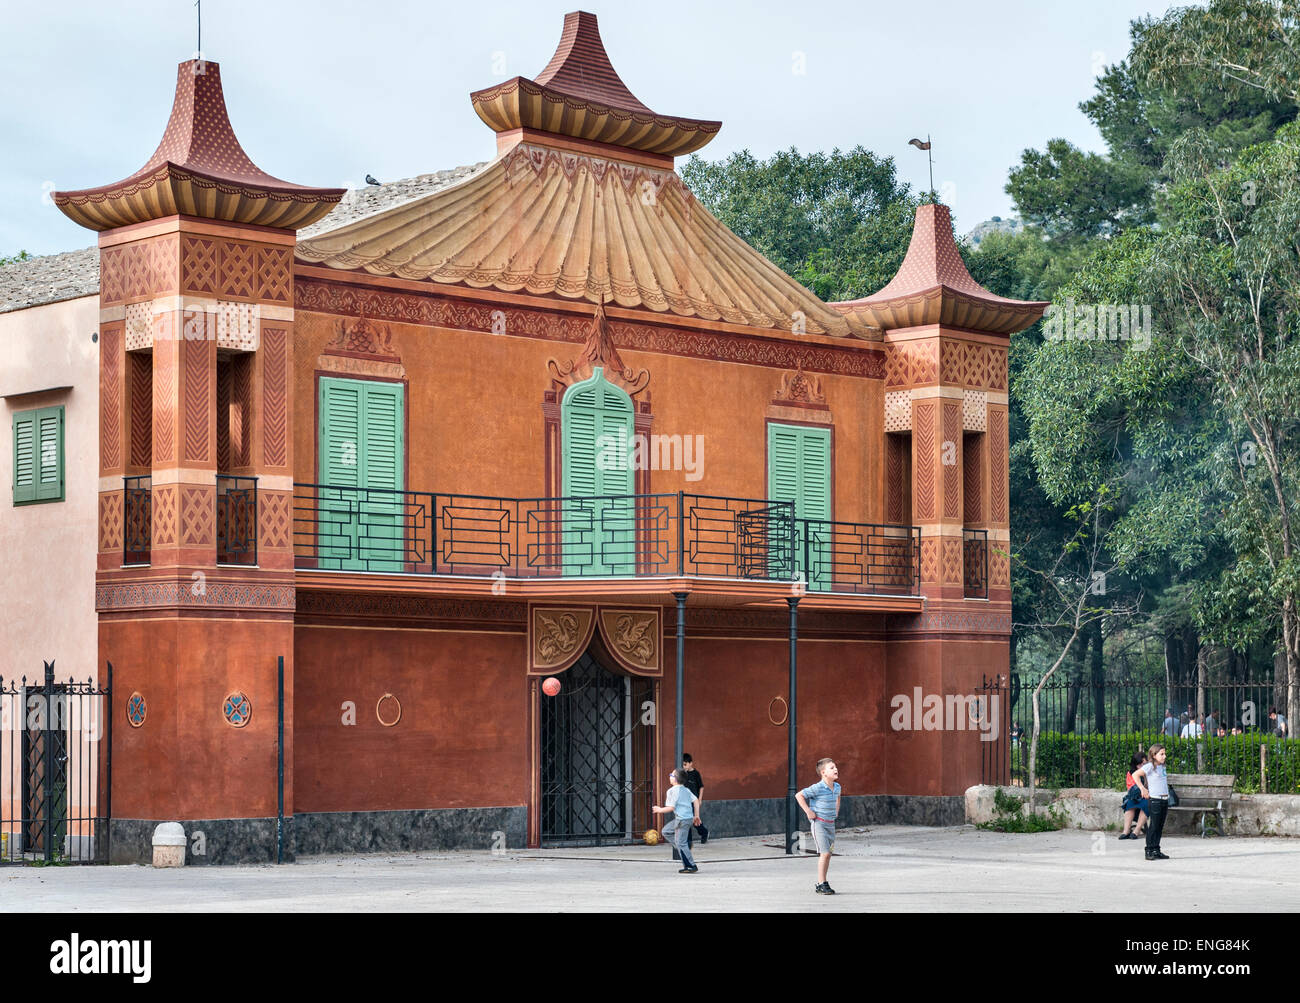 The Palazzina Cinese, Palermo, Sicily, built in the 'Chinese' style in 1799. Children playing at the entrance Stock Photo